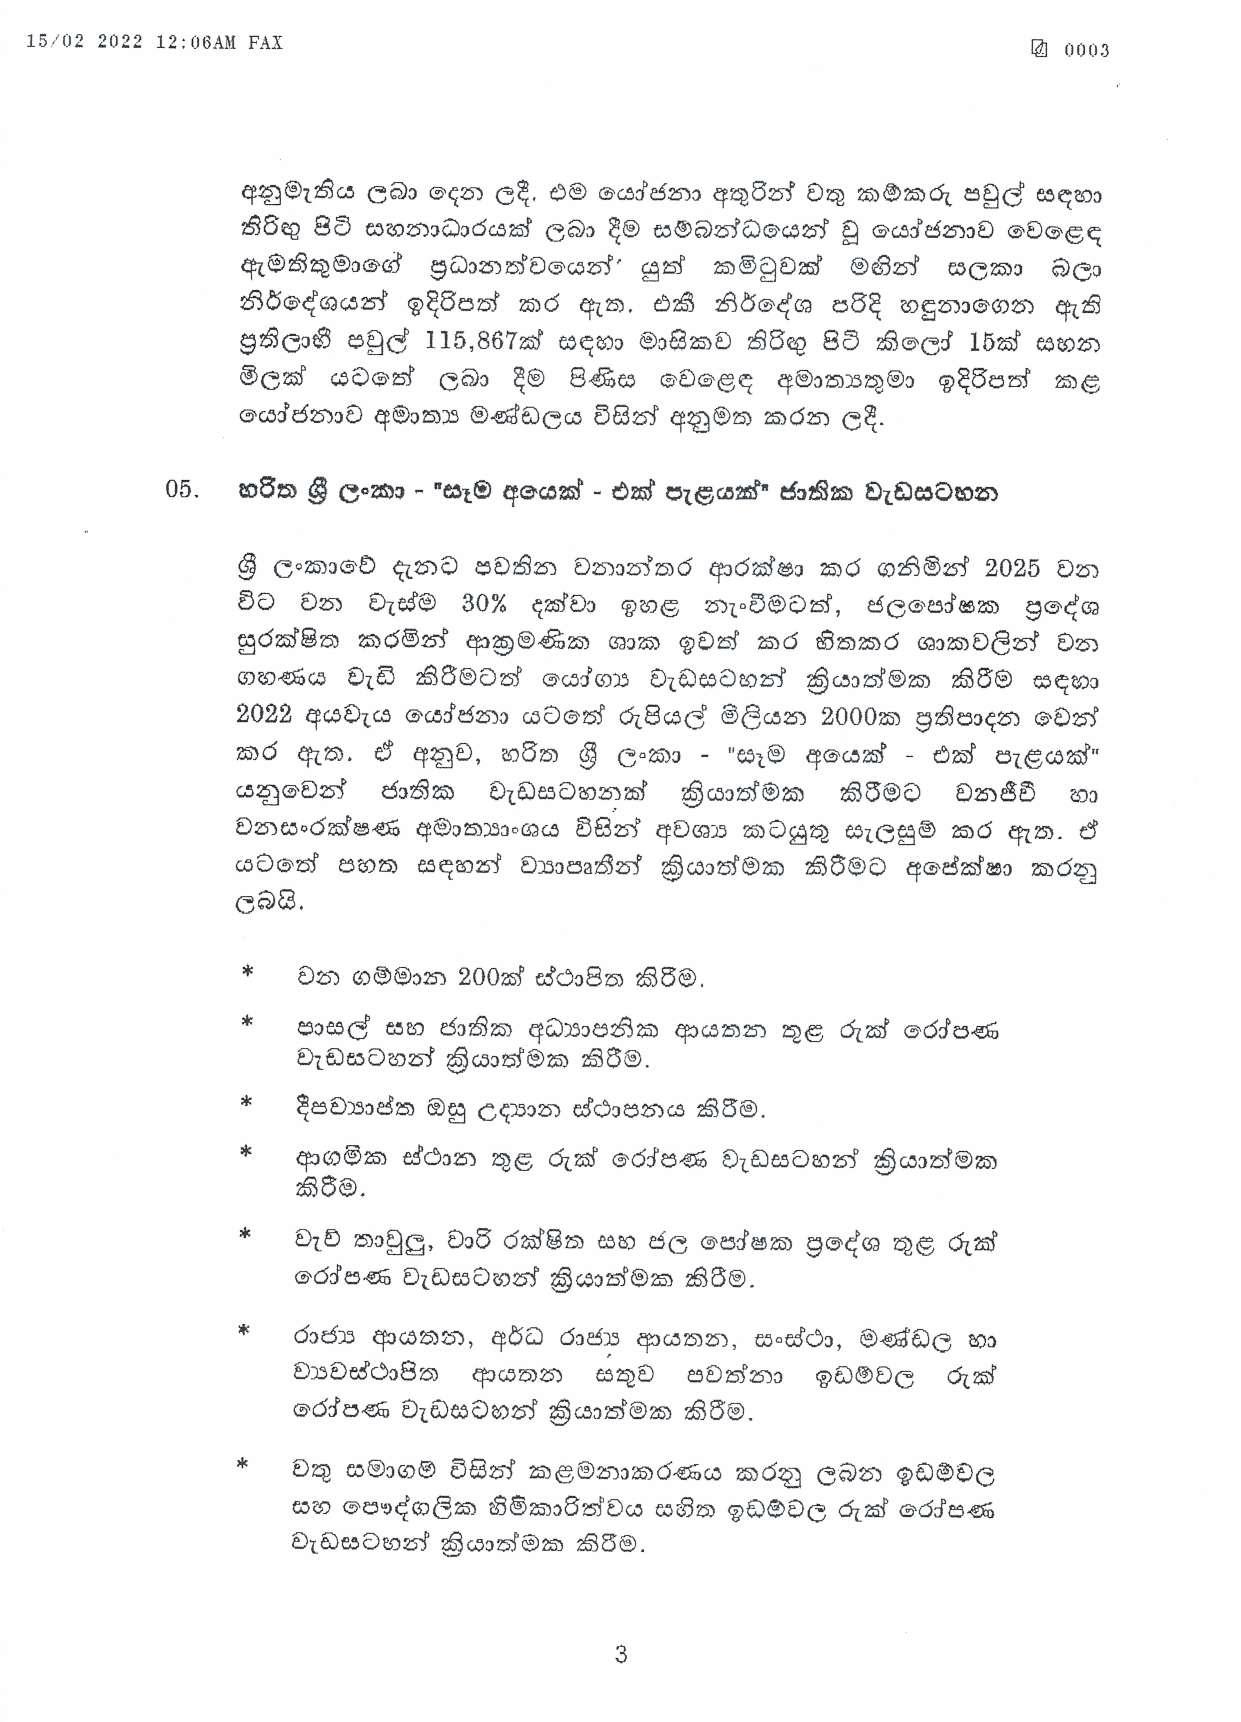 Cabinet Decision on 14.02.2022 page 003